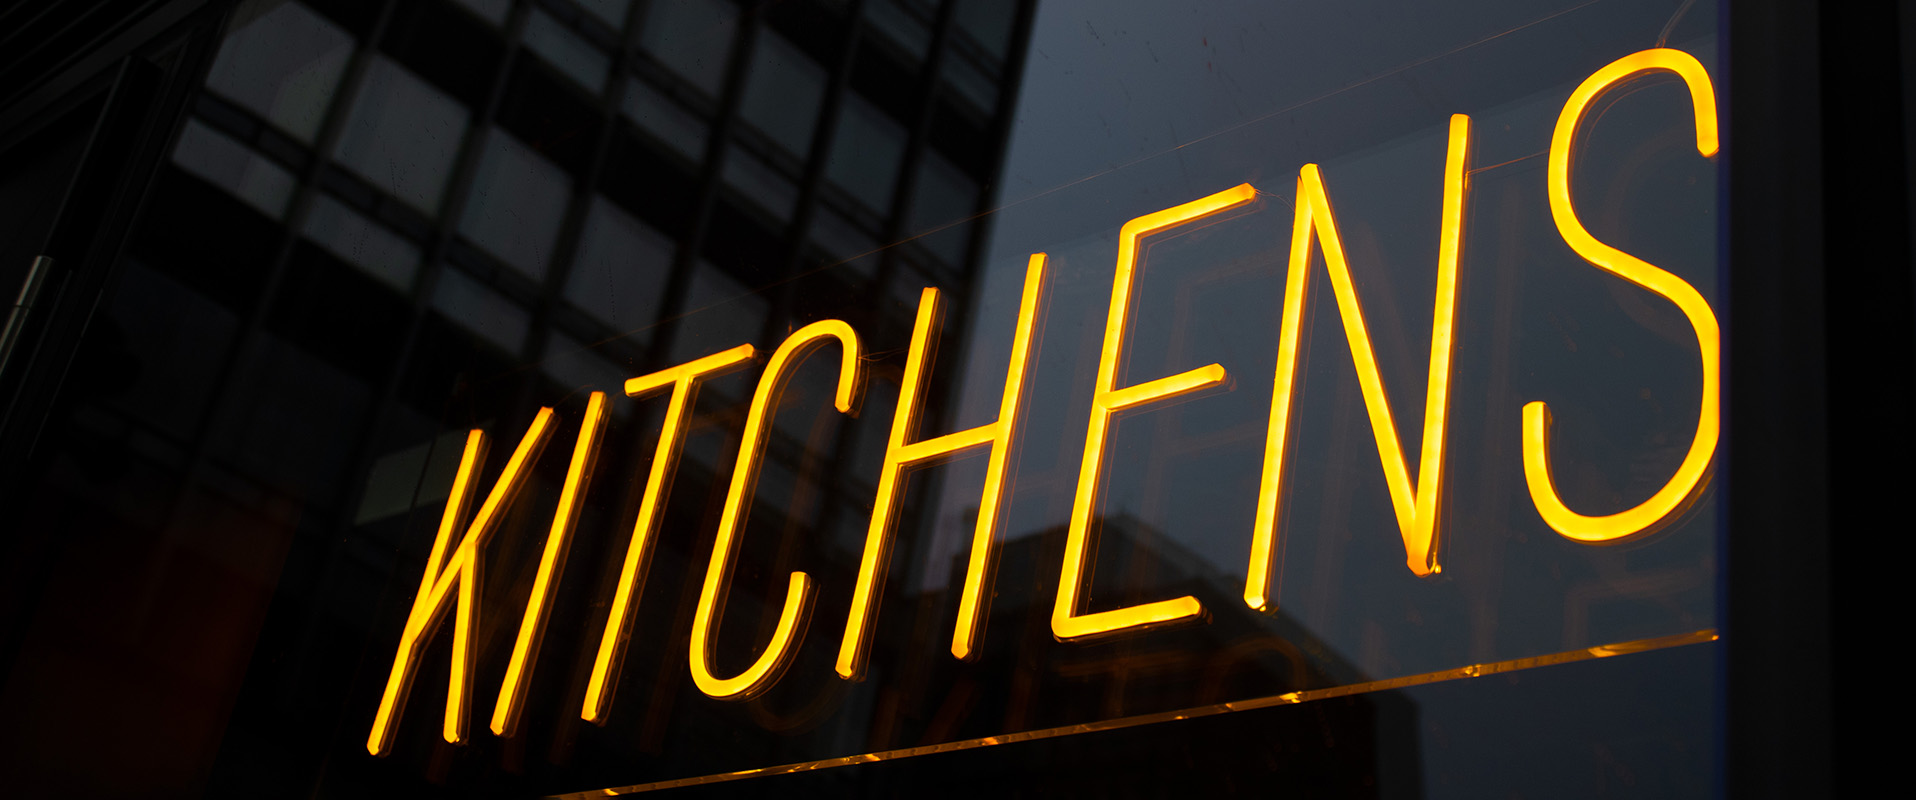 Close up shot of yellow faux LED neon signage with the word "Kitchen"